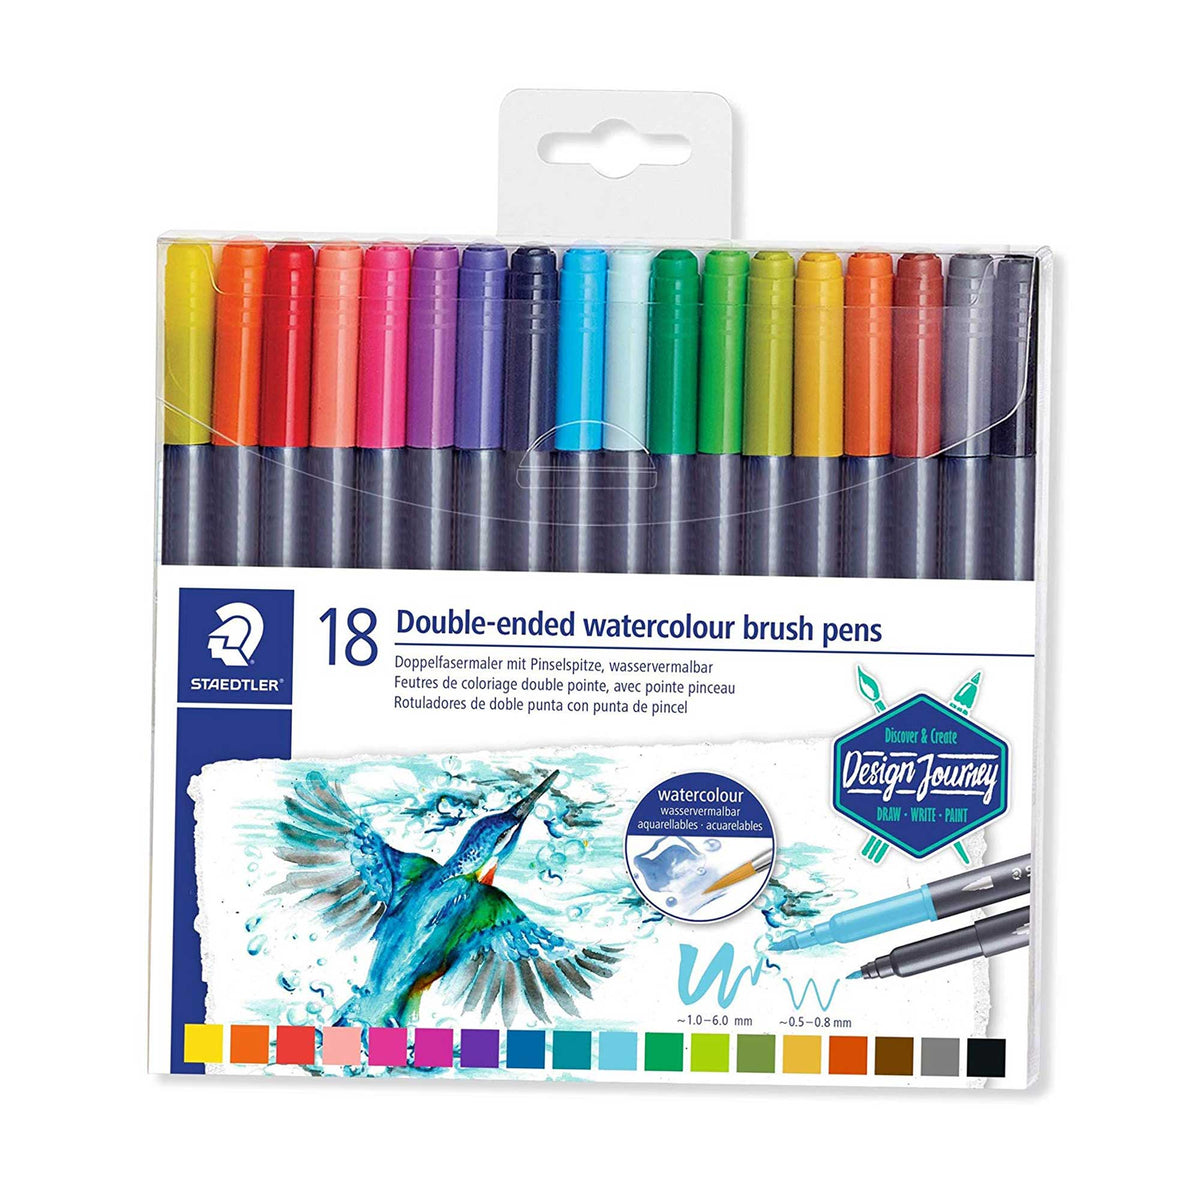 Wallet containing 18 double-ended watercolour brush pens in assorted colours